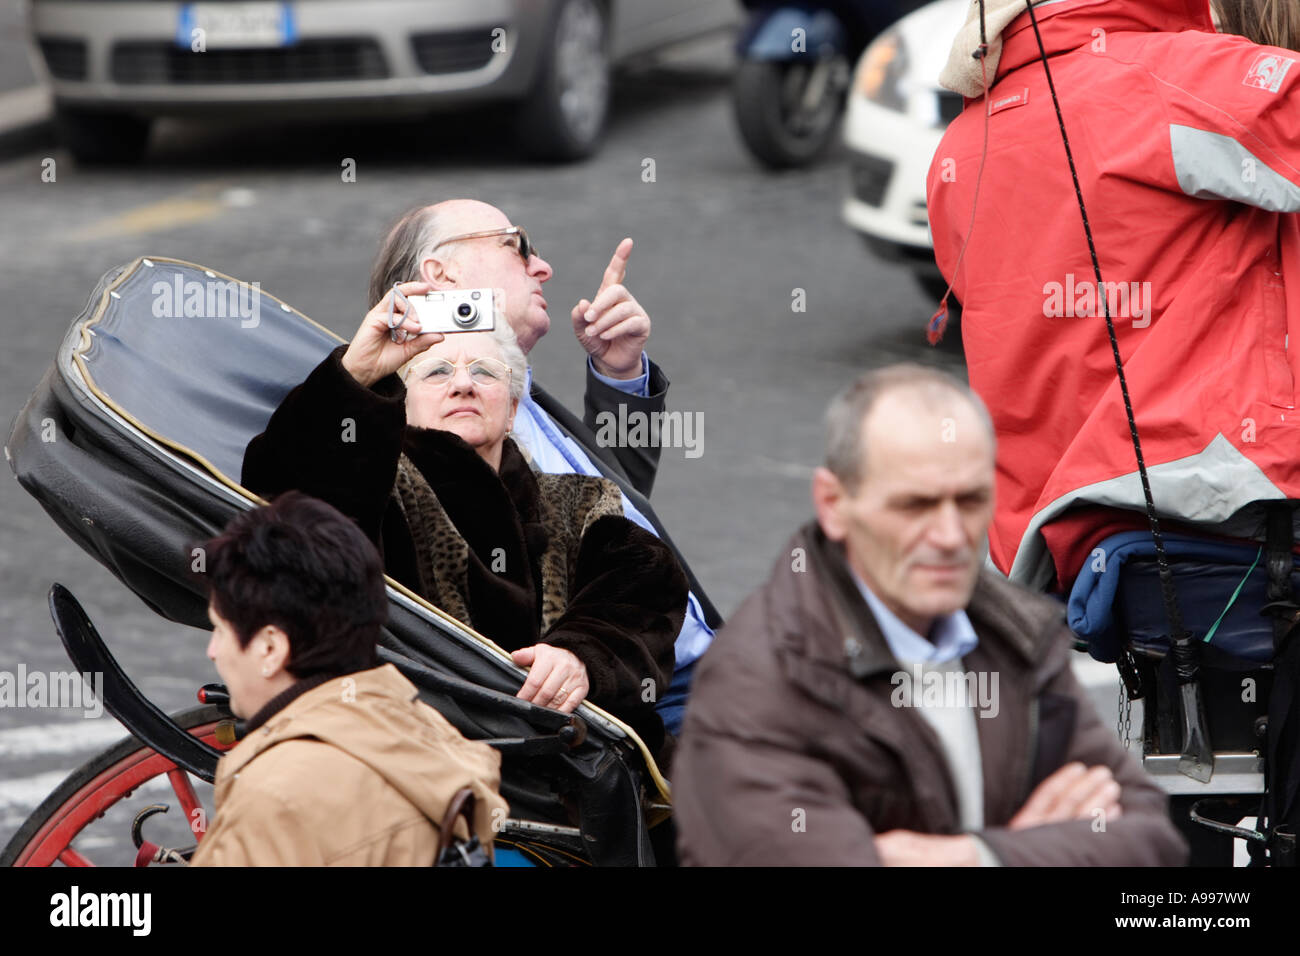 Tourists take photos while a trip with a carriage in Rom, Italy Stock Photo